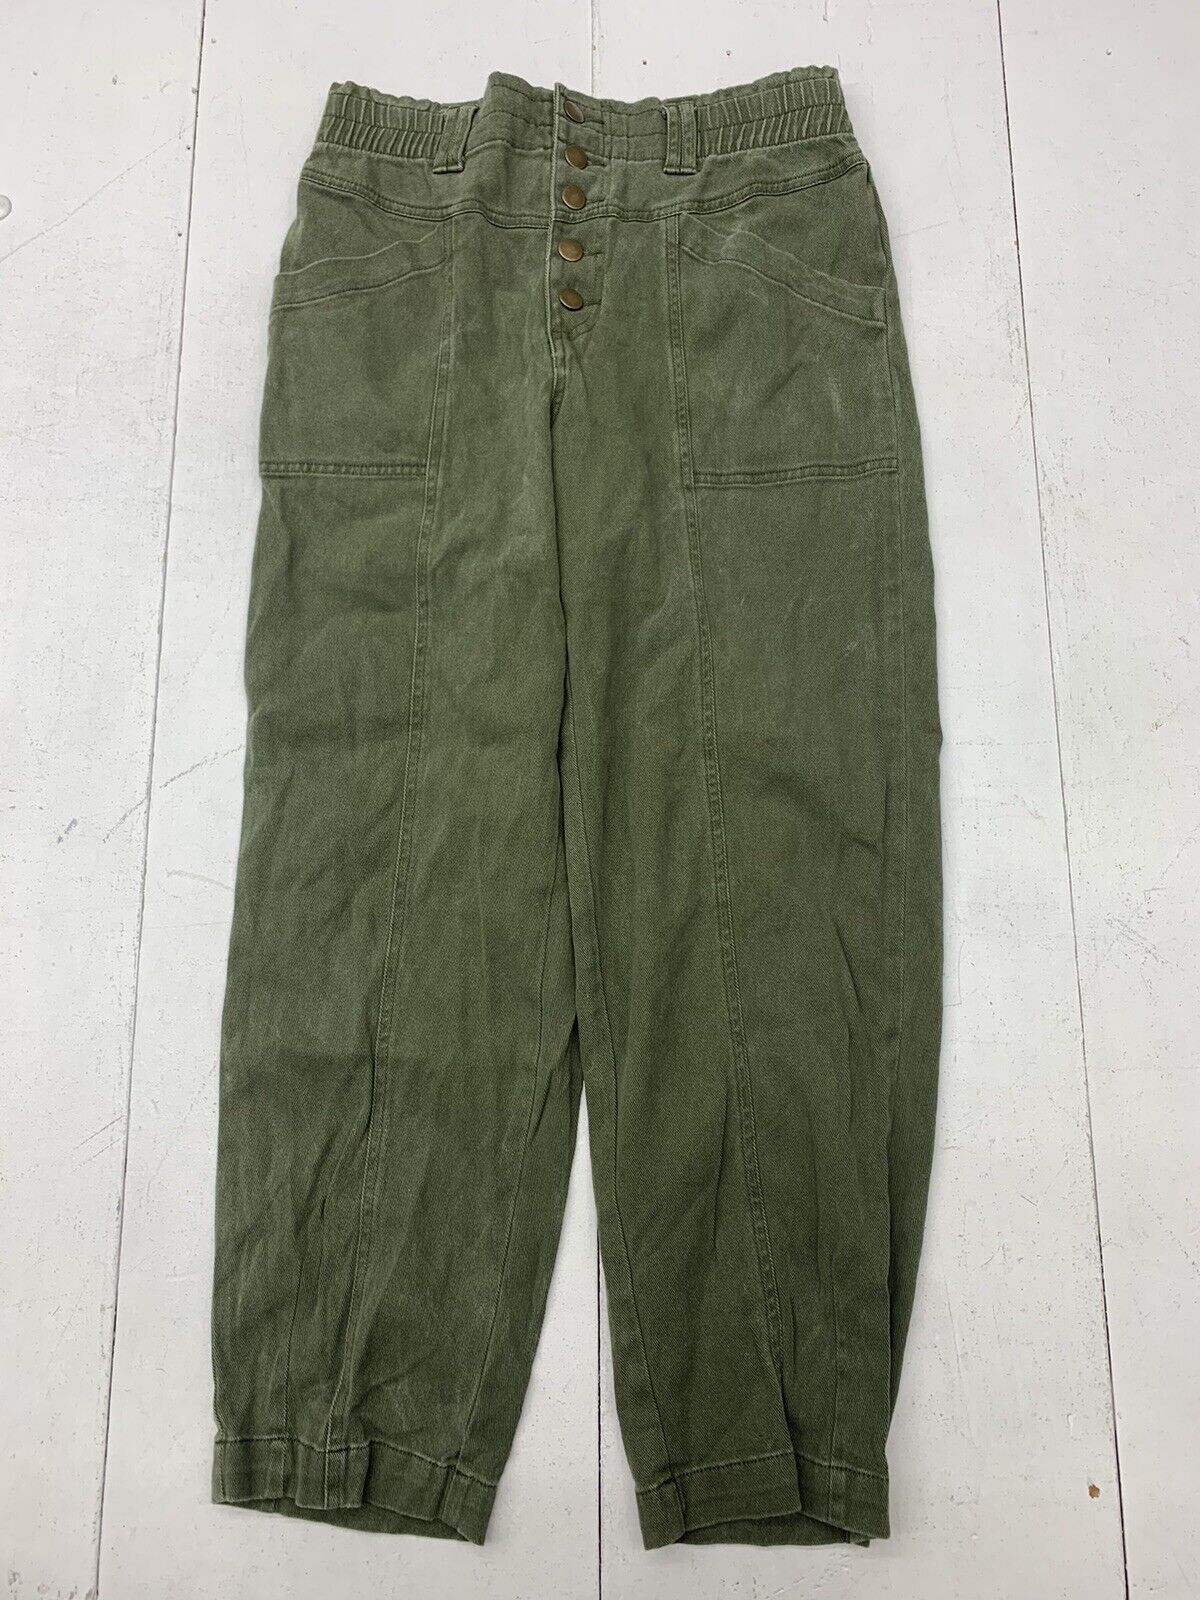 Knox Rose Womens Green Button Fly Pants Size Small - beyond exchange